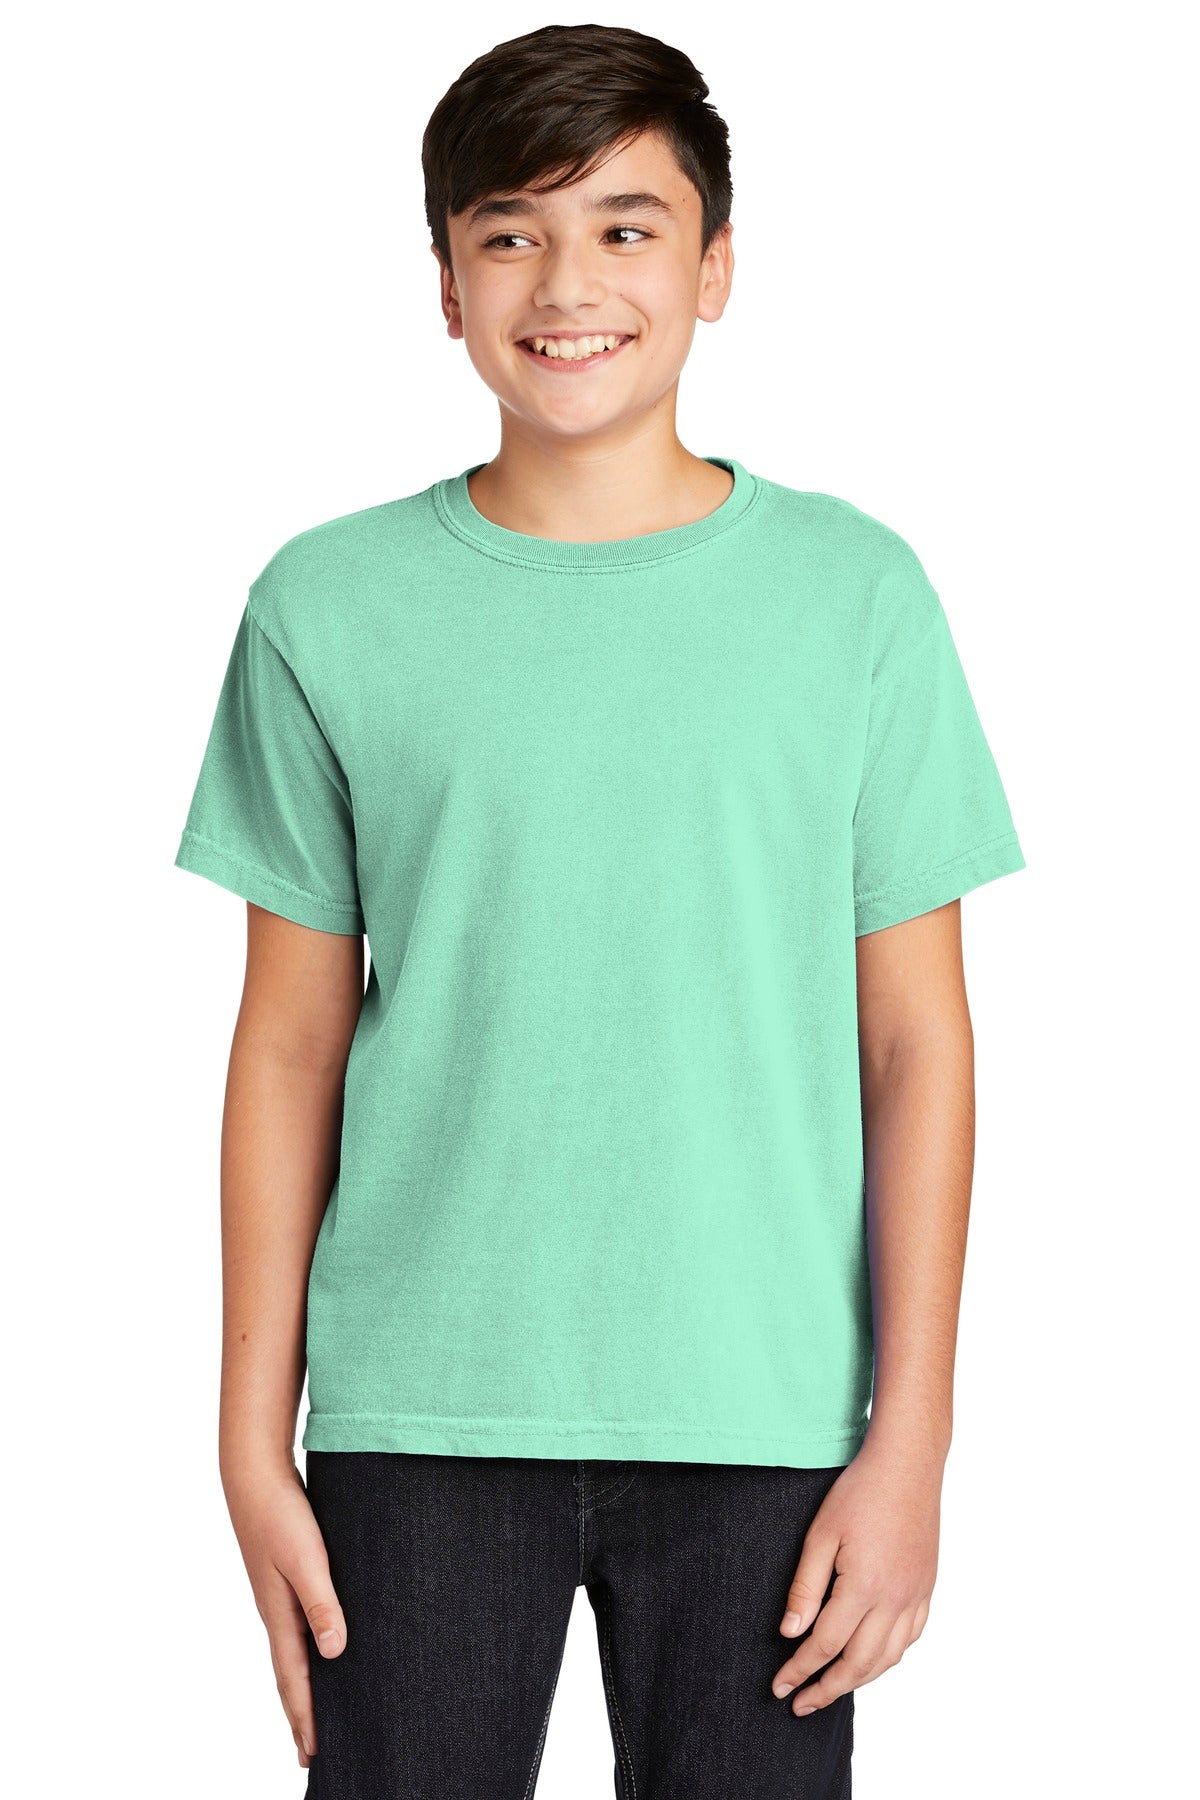 COMFORT COLORS ® Youth Heavyweight Ring Spun Tee. 9018